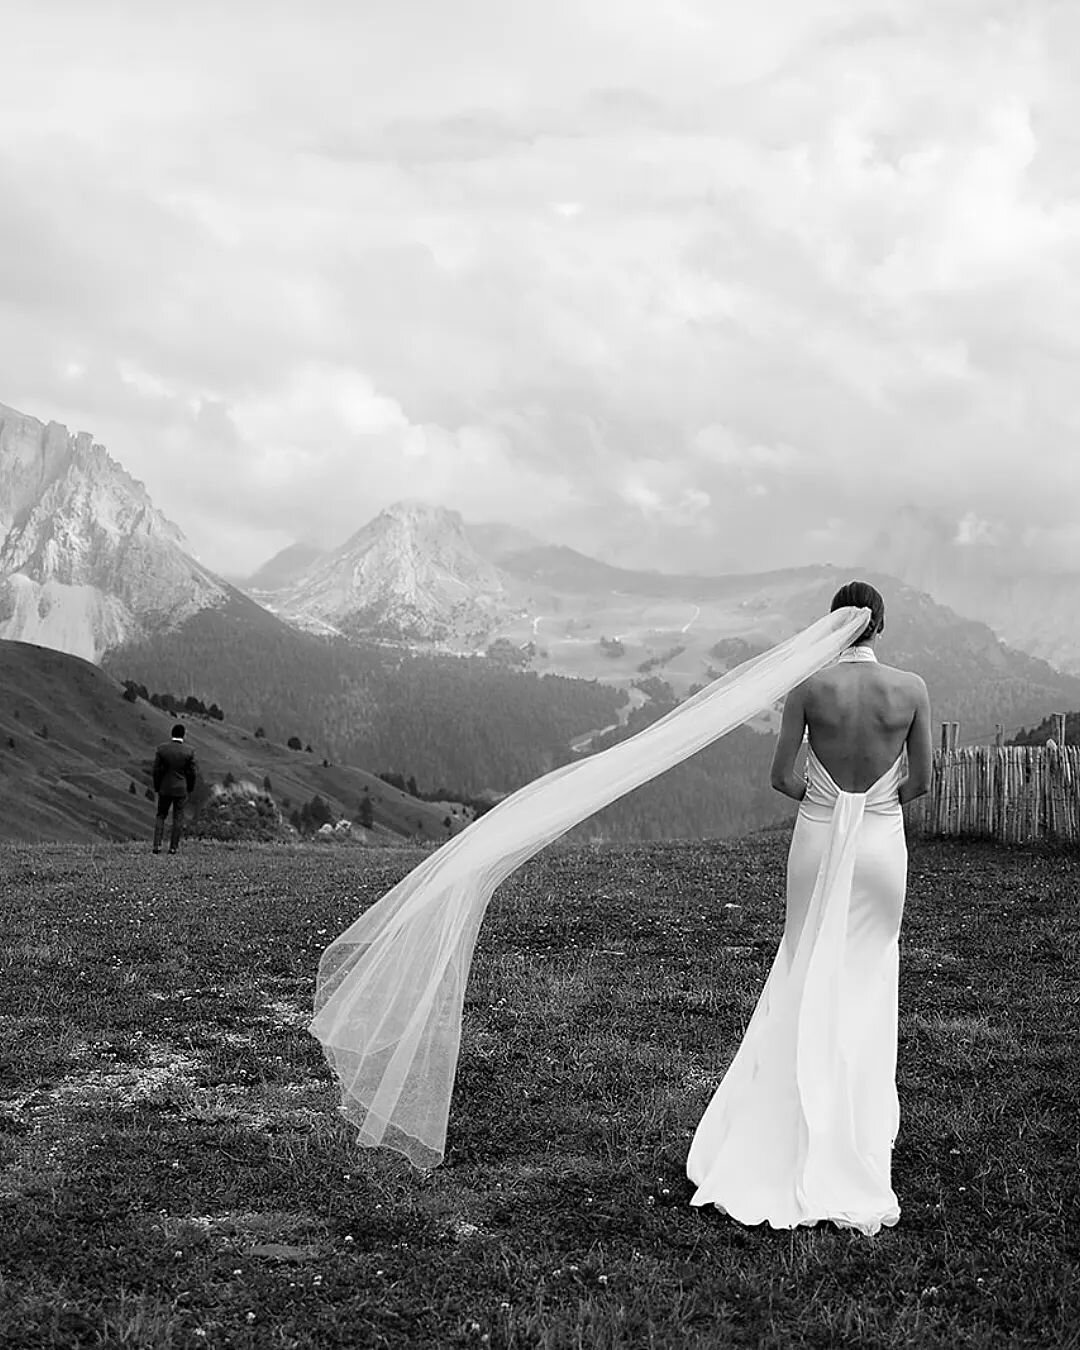 When the two Marathon runners decide to get married on the meadow under the most beautiful temple of time, the Dolomites majestic picks.

Planning @dolomitesweddingplanner
Muah @viki_hairandmakeup
Florist @marie.floralstudio
.
.
.
.
.
.
.
.
.
.
.
.
.